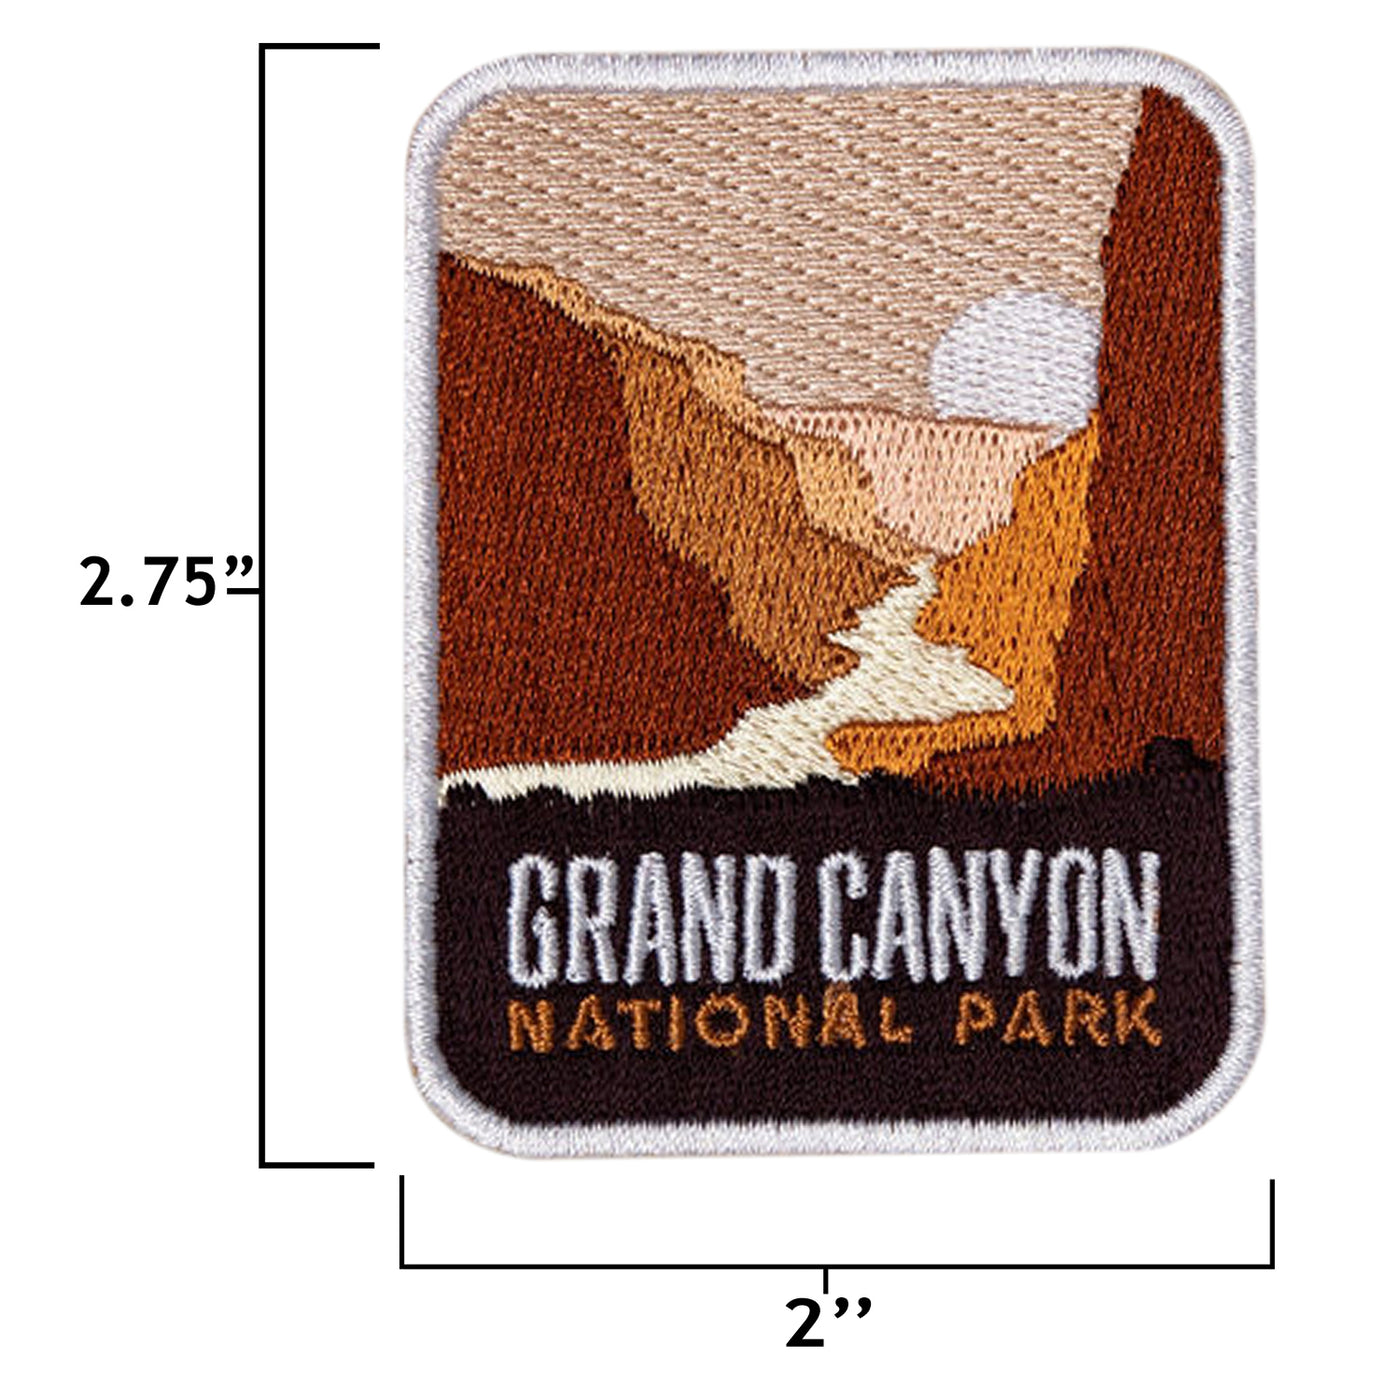 Star Wars National Park PVC Patches Series 2 